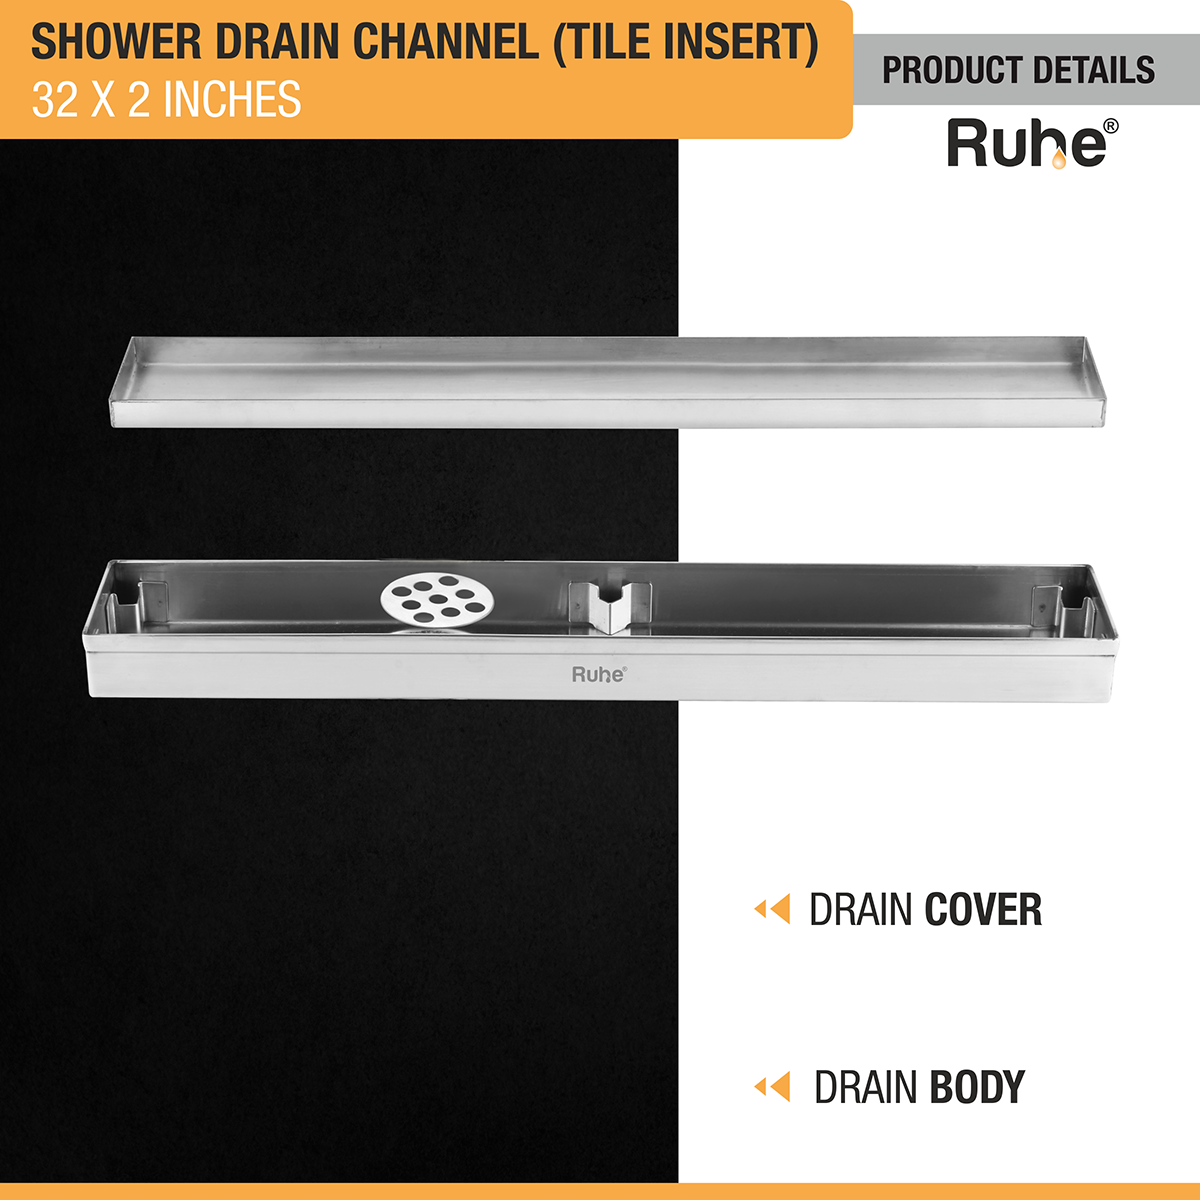 Tile Insert Shower Drain Channel (32 x 2 Inches) (304 Grade) - by Ruhe®